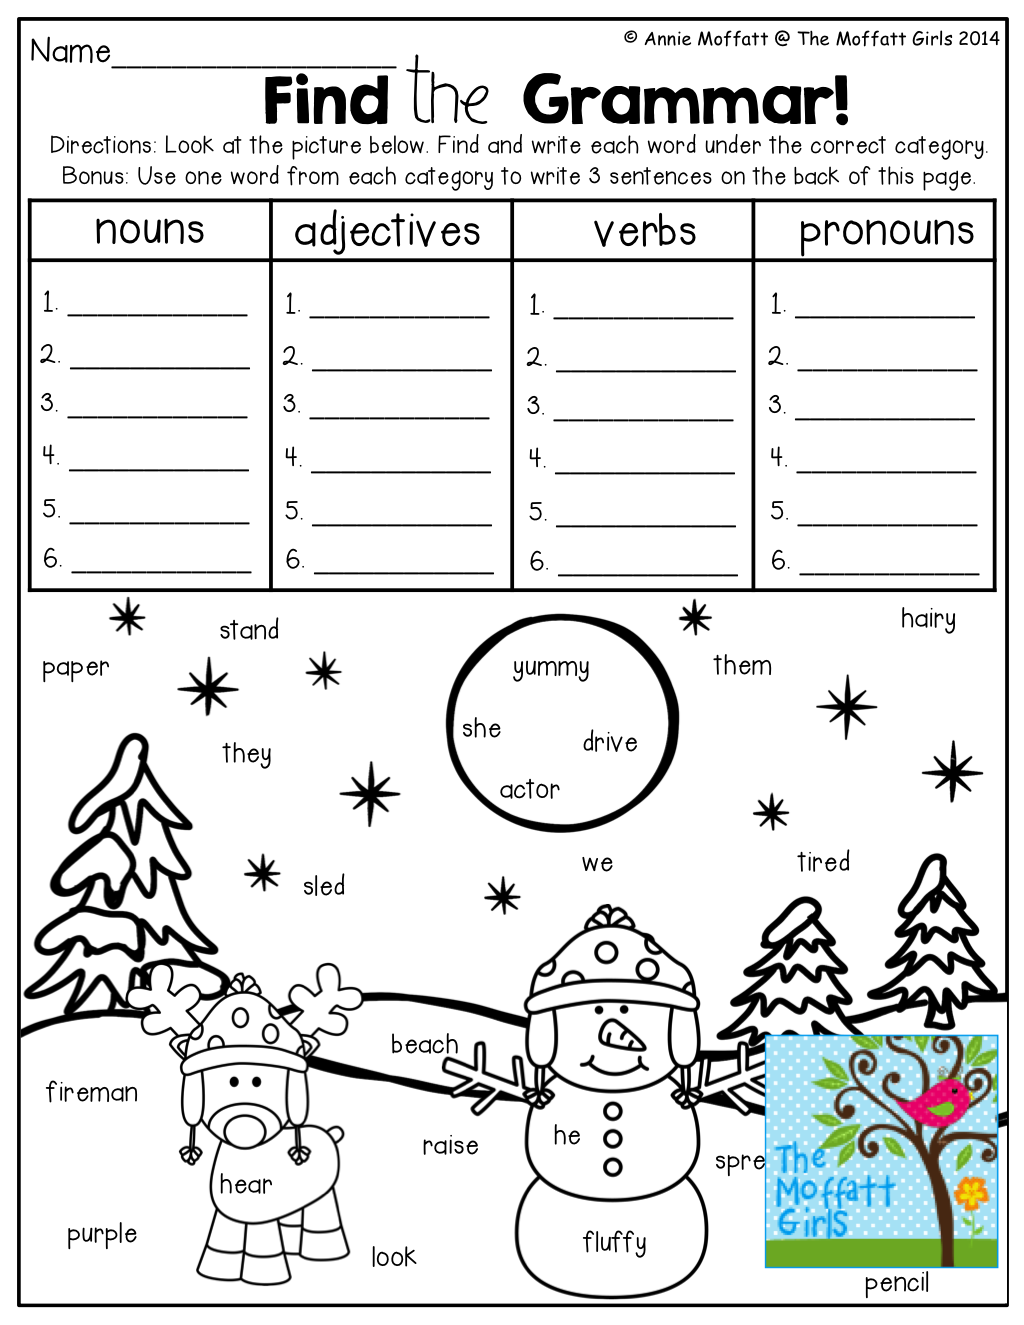 Find the Grammar!  Find and record the grammar words from the picture! TONS of FUN and effective printables!